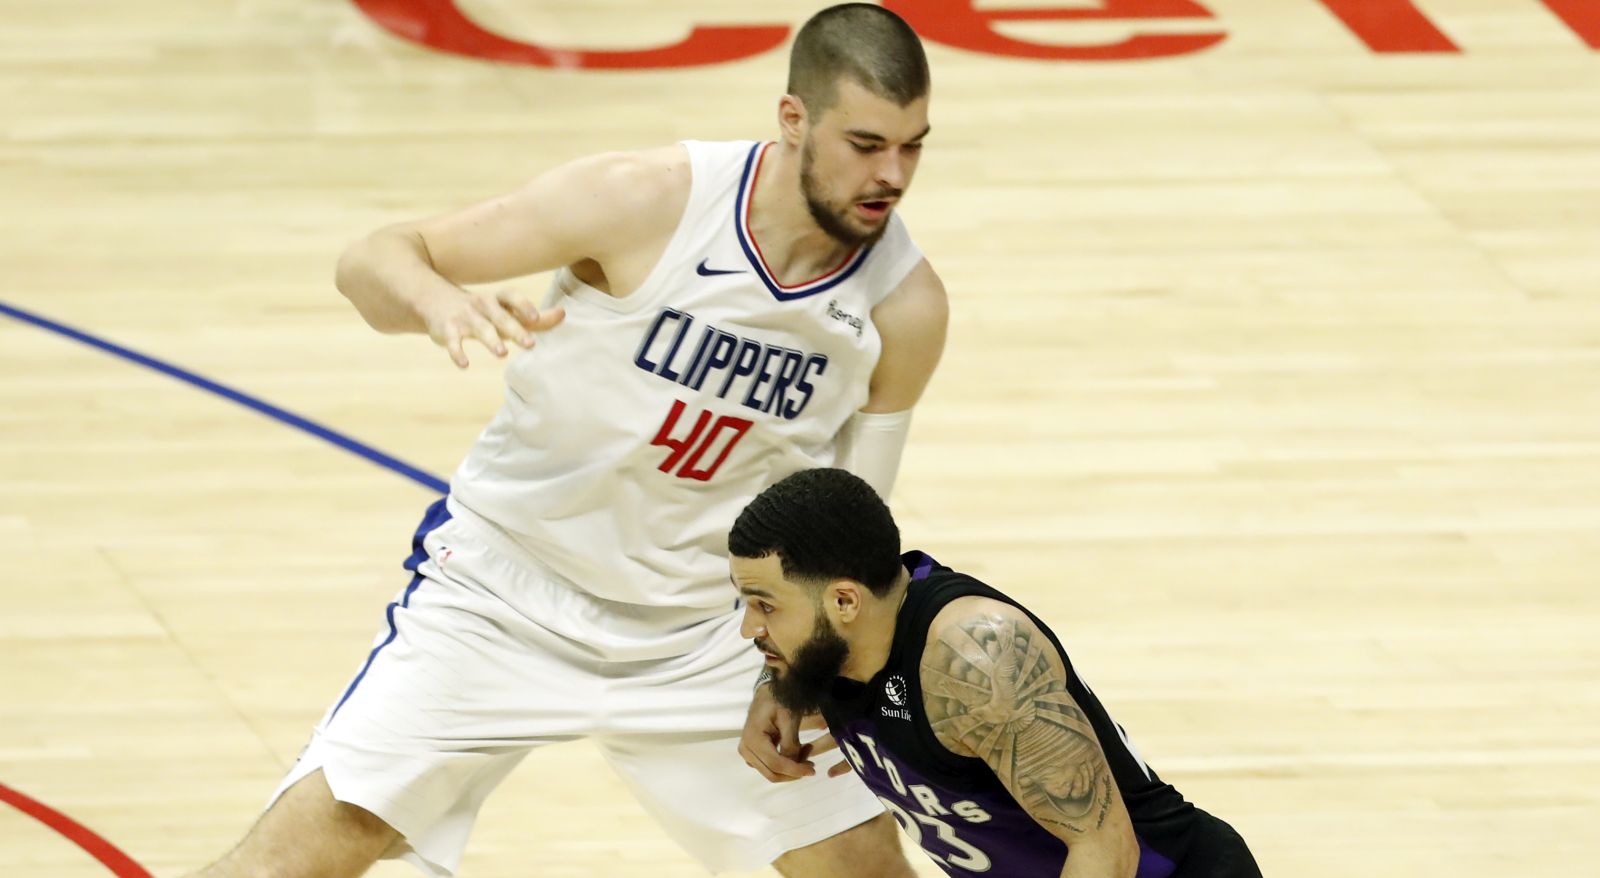 epa09178348 Toronto Raptors guard Fred VanVleet (R) in action against LA Clippers center Ivica Zubac during the fourth quarter of the NBA game between the Toronto Raptors and the Los Angeles Clippers at the Staples Center in Los Angeles, California, USA, 04 May 2021.  EPA/ETIENNE LAURENT SHUTTERSTOCK OUT